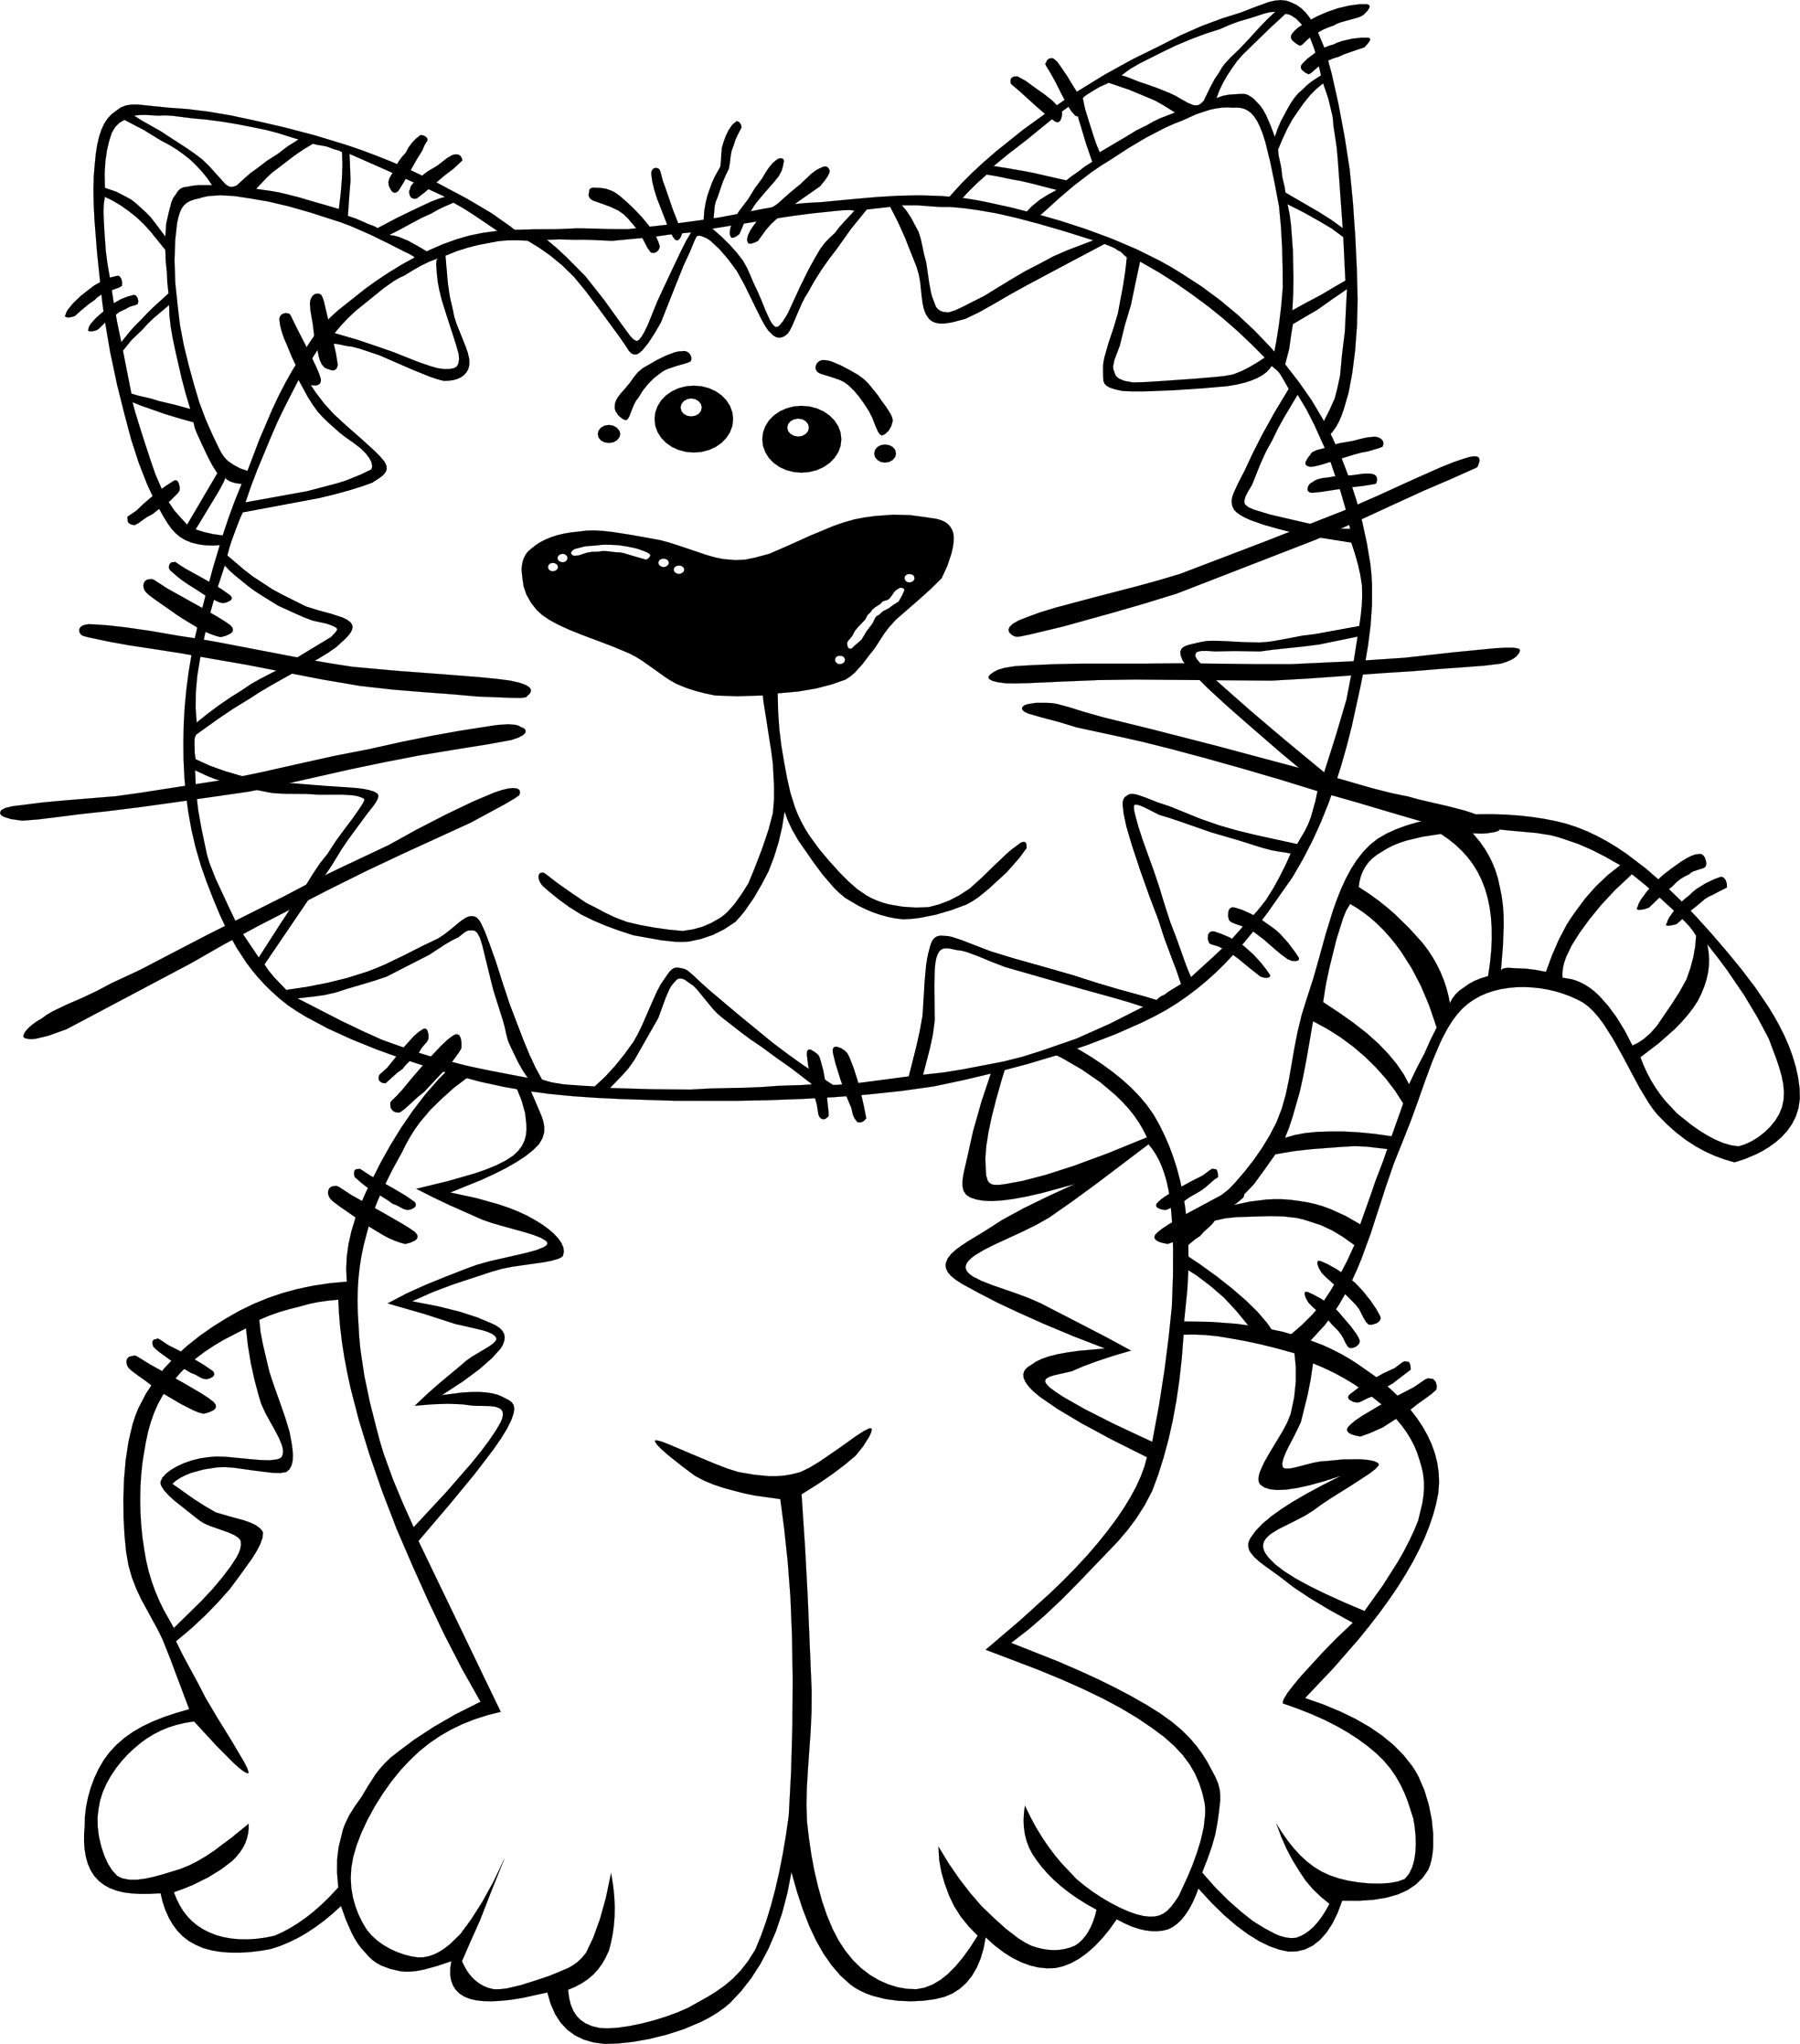 Black And White Cat Cartoon Pictures | Free download on ClipArtMag